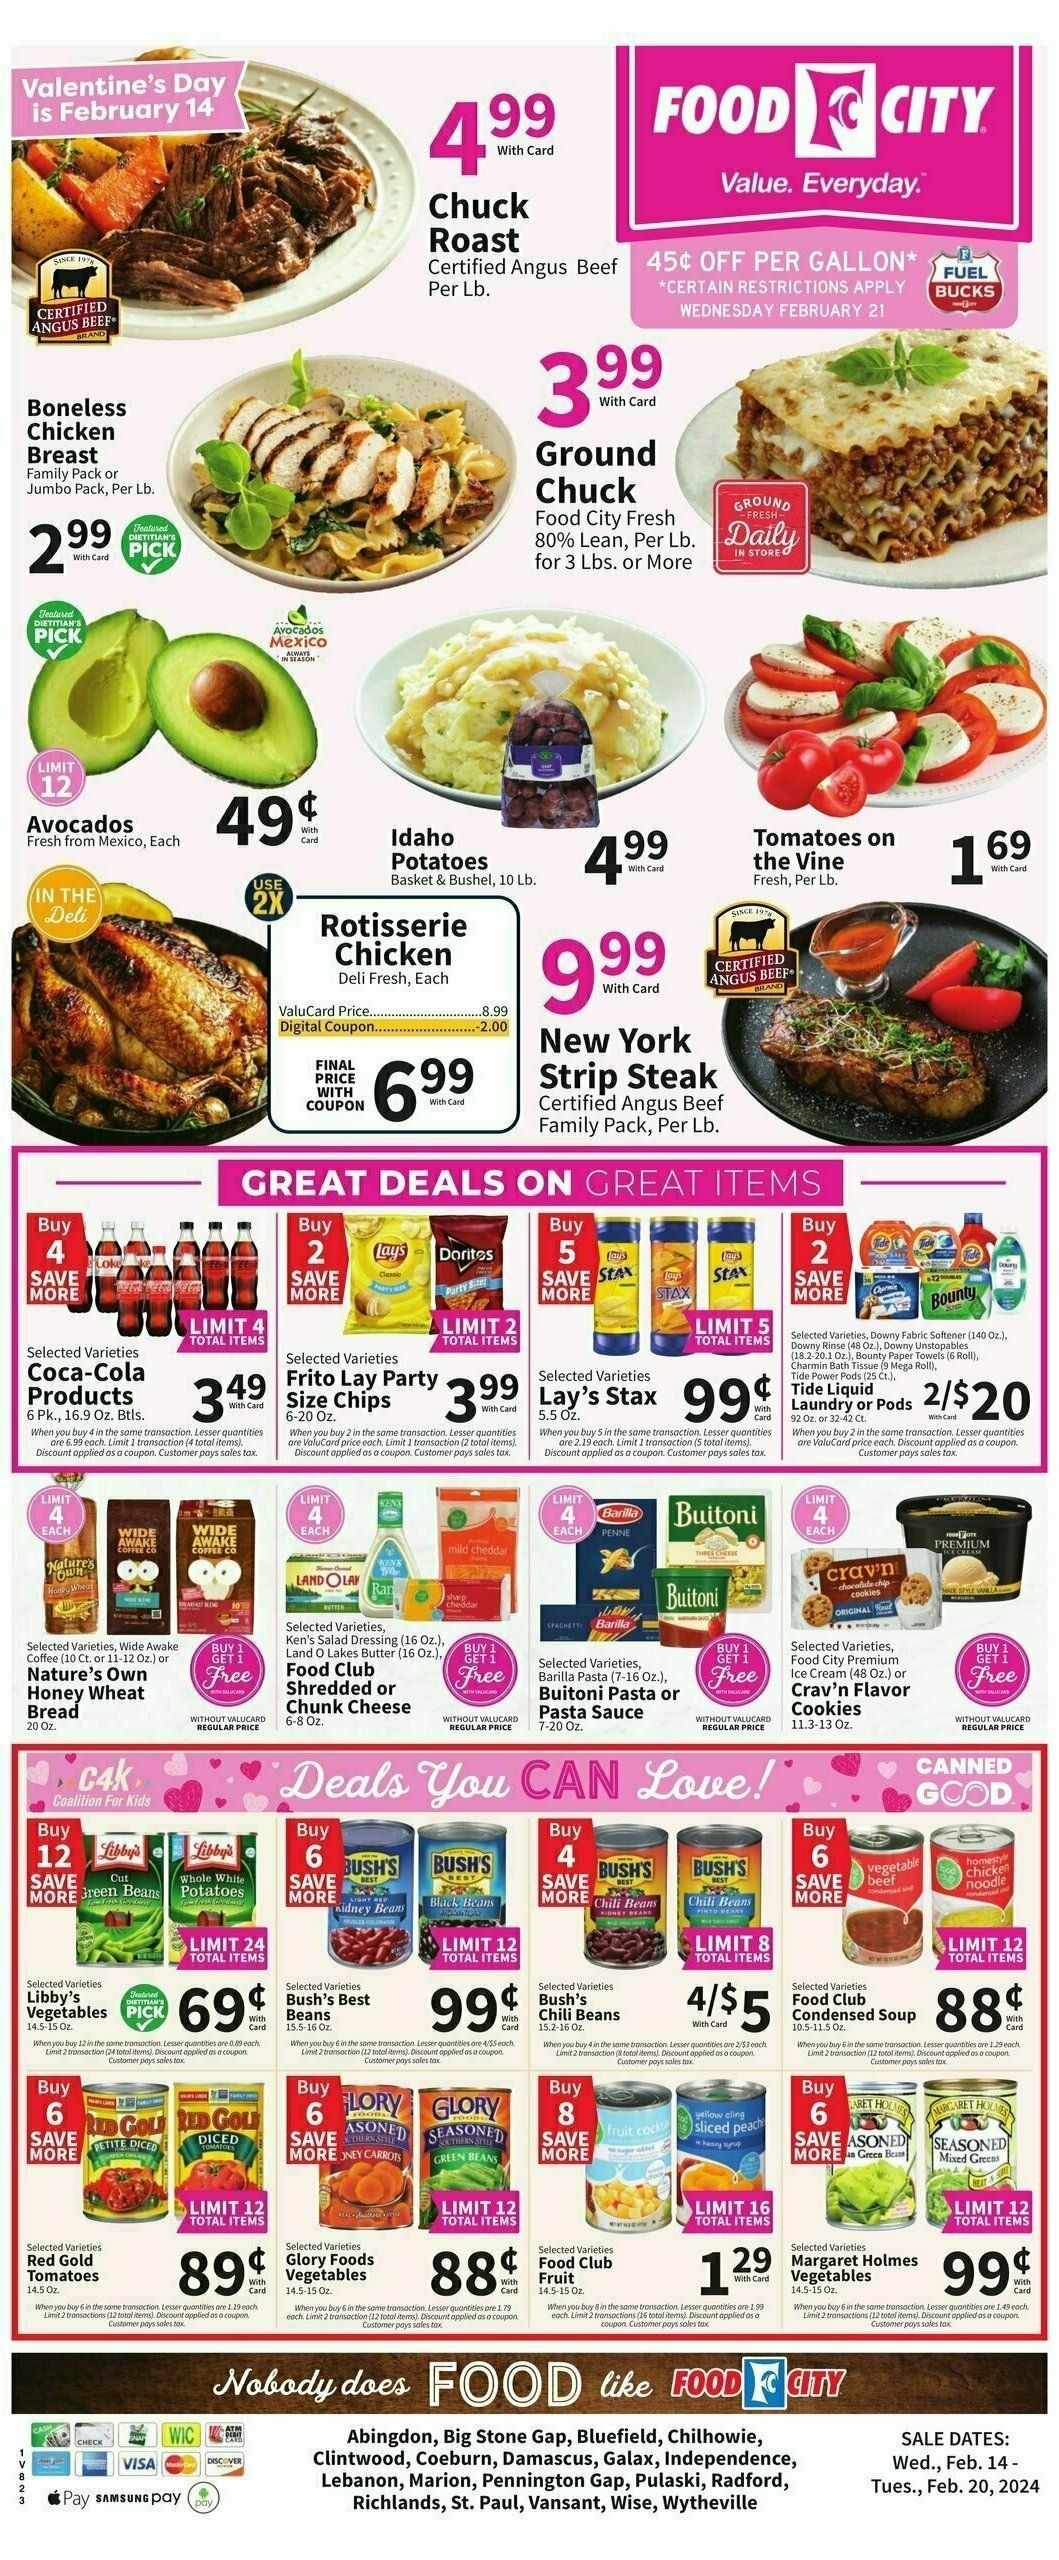 Food City Weekly Ad from February 14